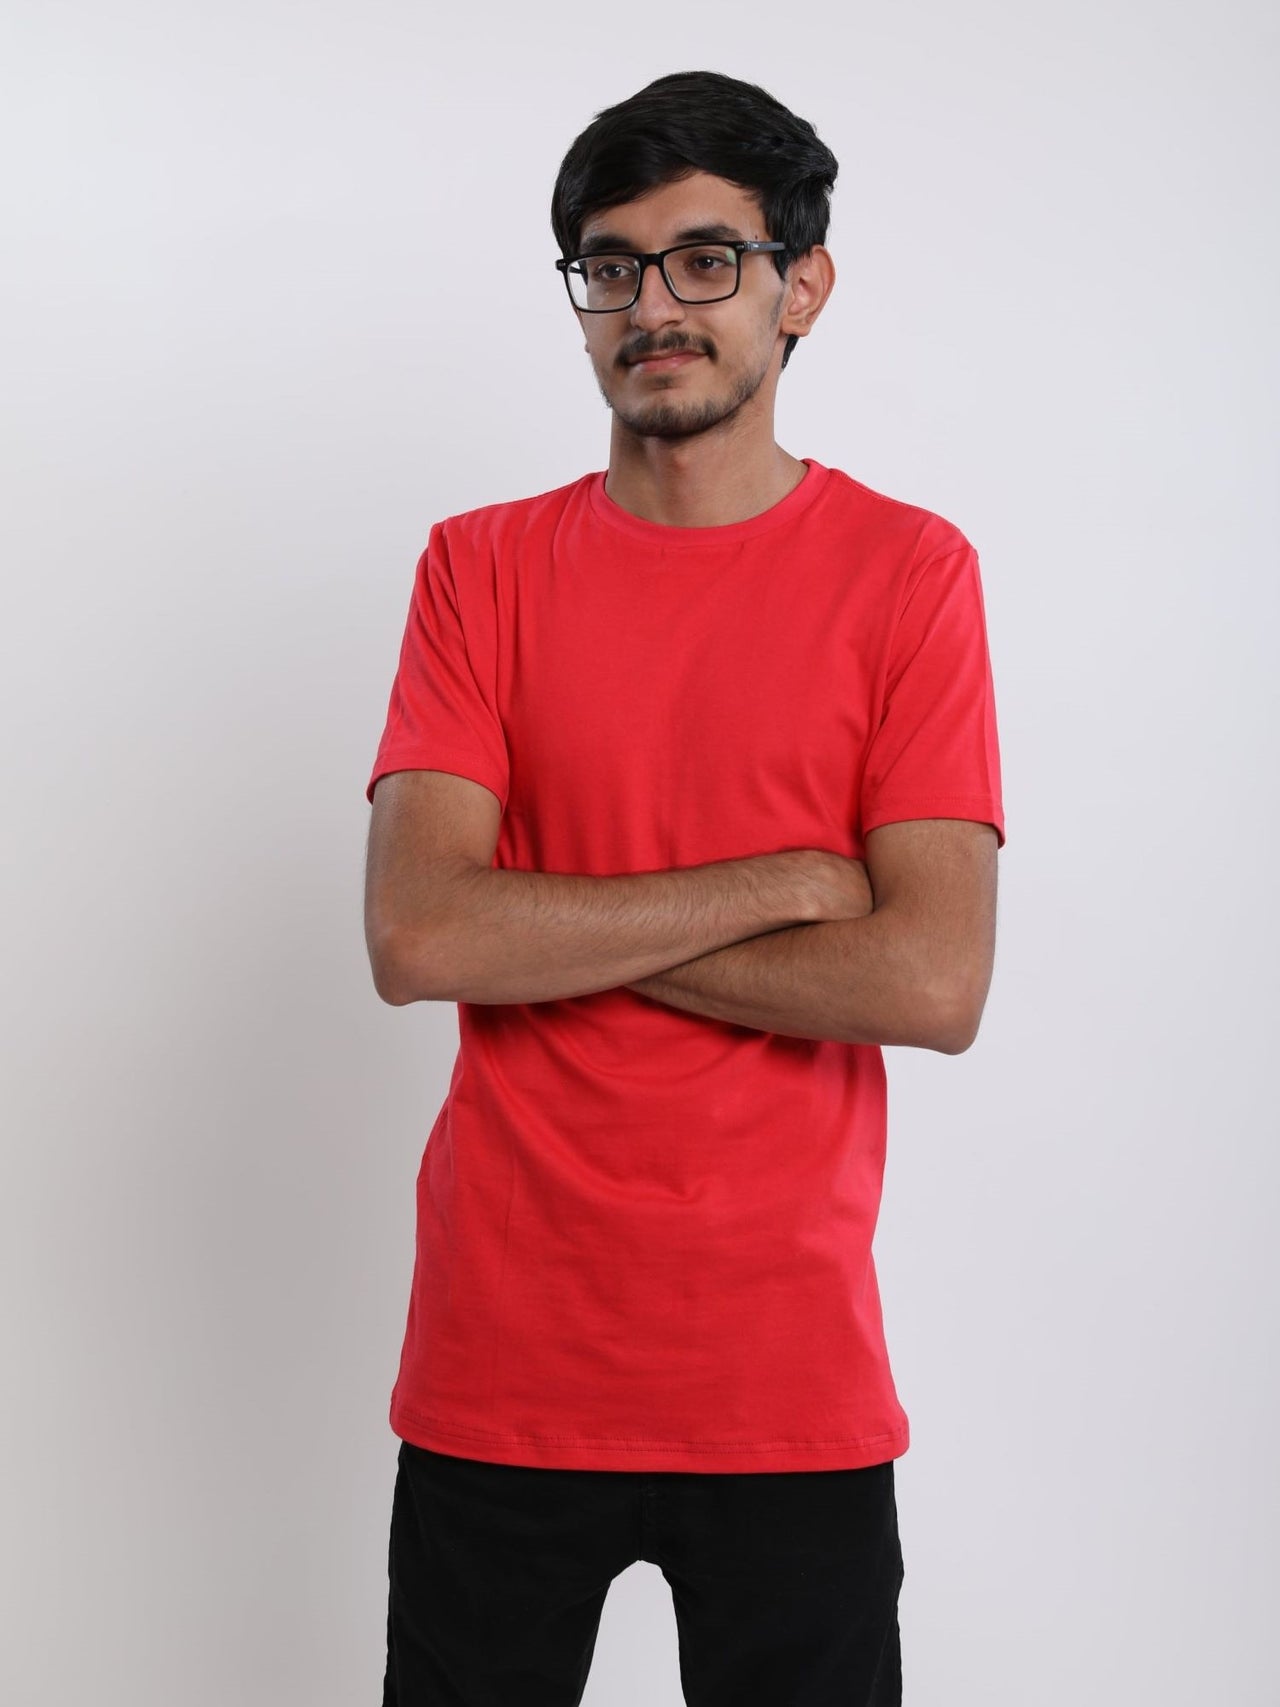 A tall skinny guy in the studio with his arms folded and wearing a red small tall slim t-shirt.